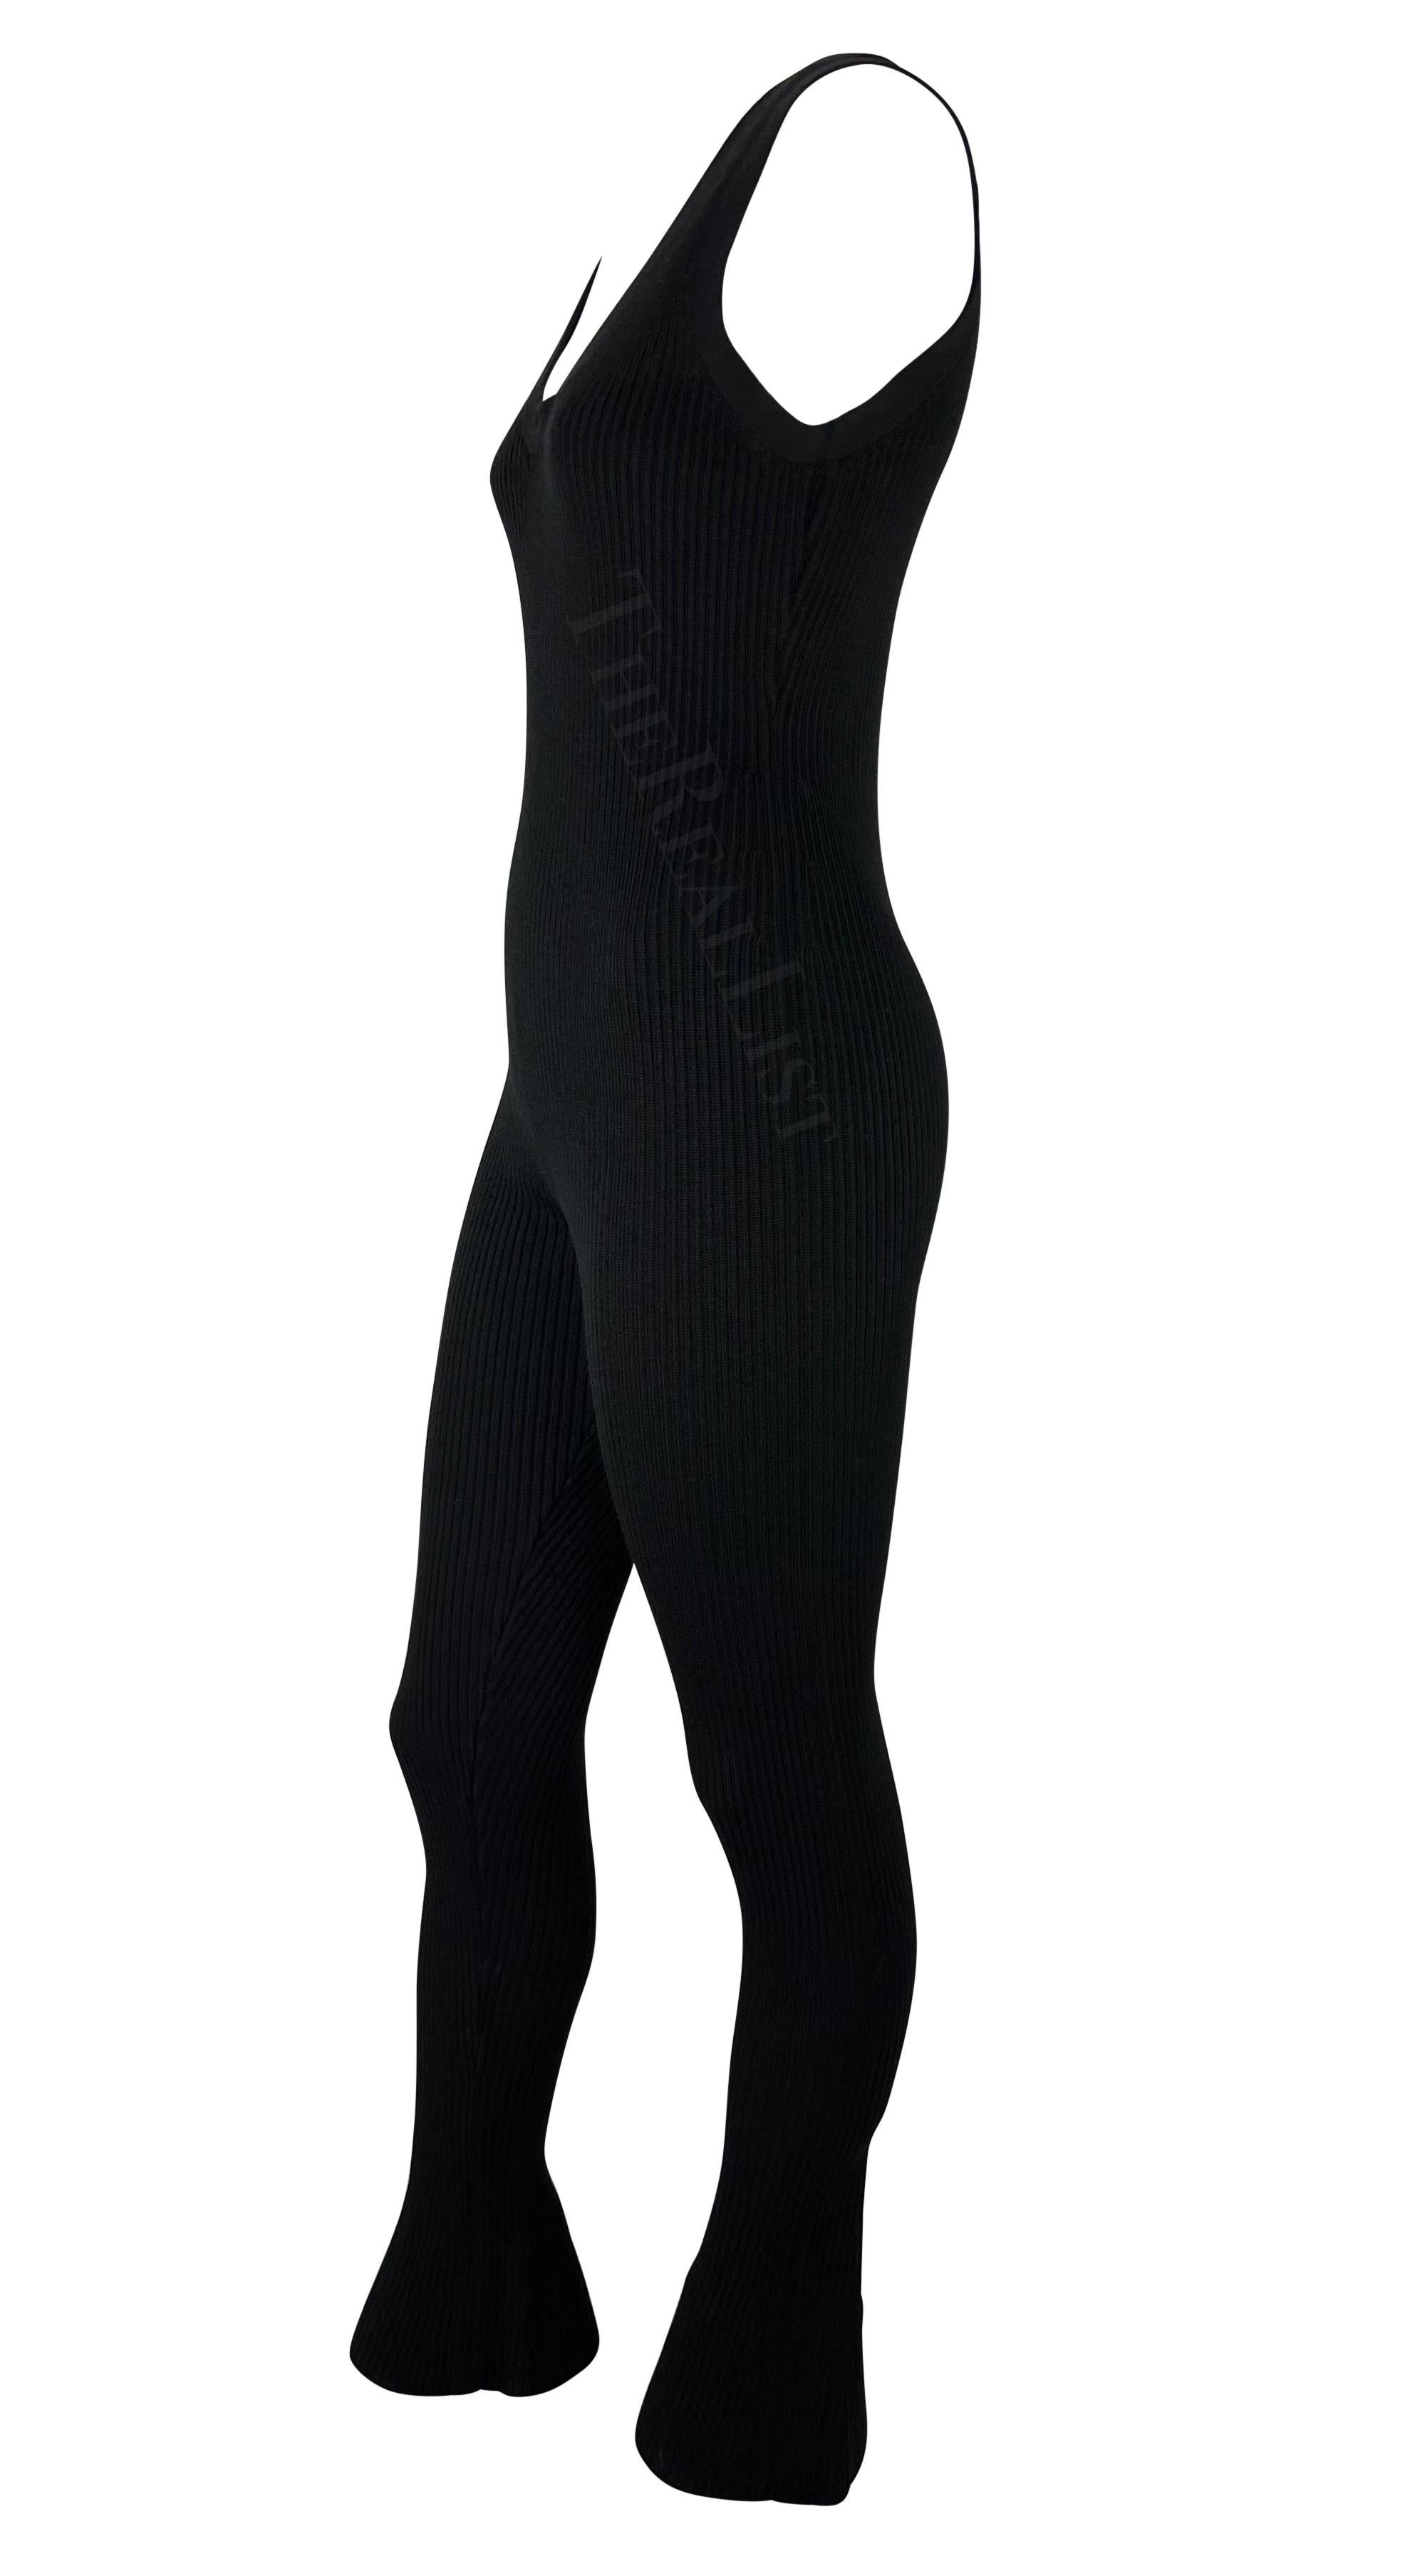 Presenting a fabulous black knit Prada body suit, designed by Miuccia Prada. From the early 2000s, this fabulous catsuit is entirely rib-knit and features a wide scoop neckline, wide tank-style shoulder straps, and a flare-cut cuffs. Stirrup straps